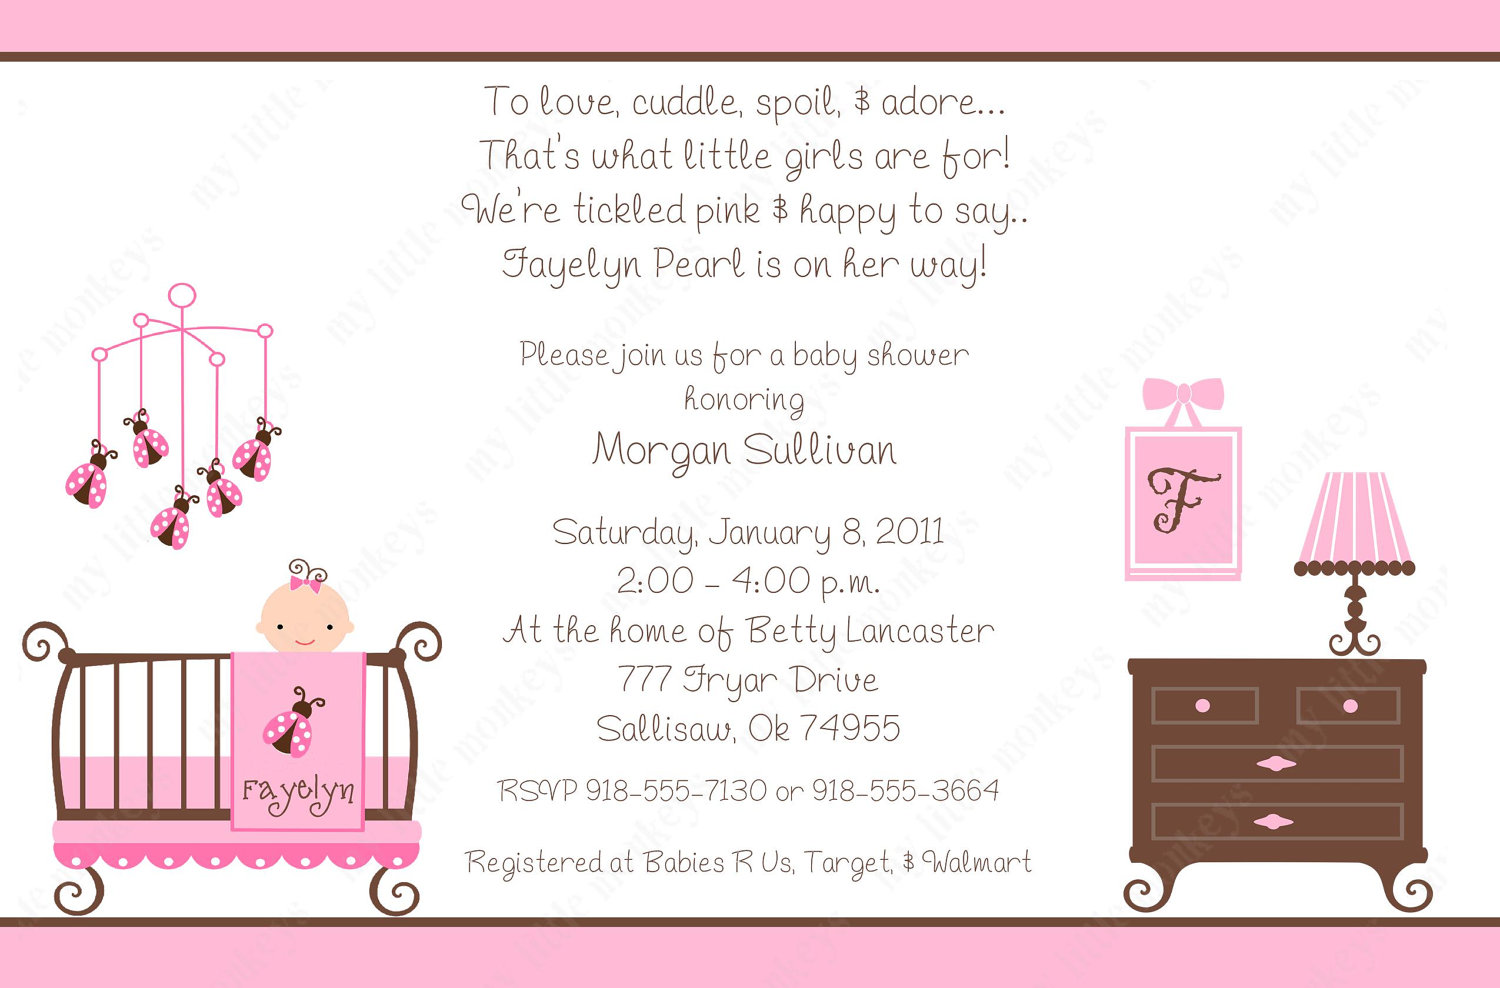 Full Size of Baby Shower:cheap Invitations Baby Shower Pinterest Baby Shower Ideas For Girls Baby Girl Themed Showers Pinterest Nursery Ideas Baby Girl Themes For Baby Shower Baby Shower Themes Baby Shower Ideas Baby Shower Decorations Printable Baby Shower Invitations For Girl